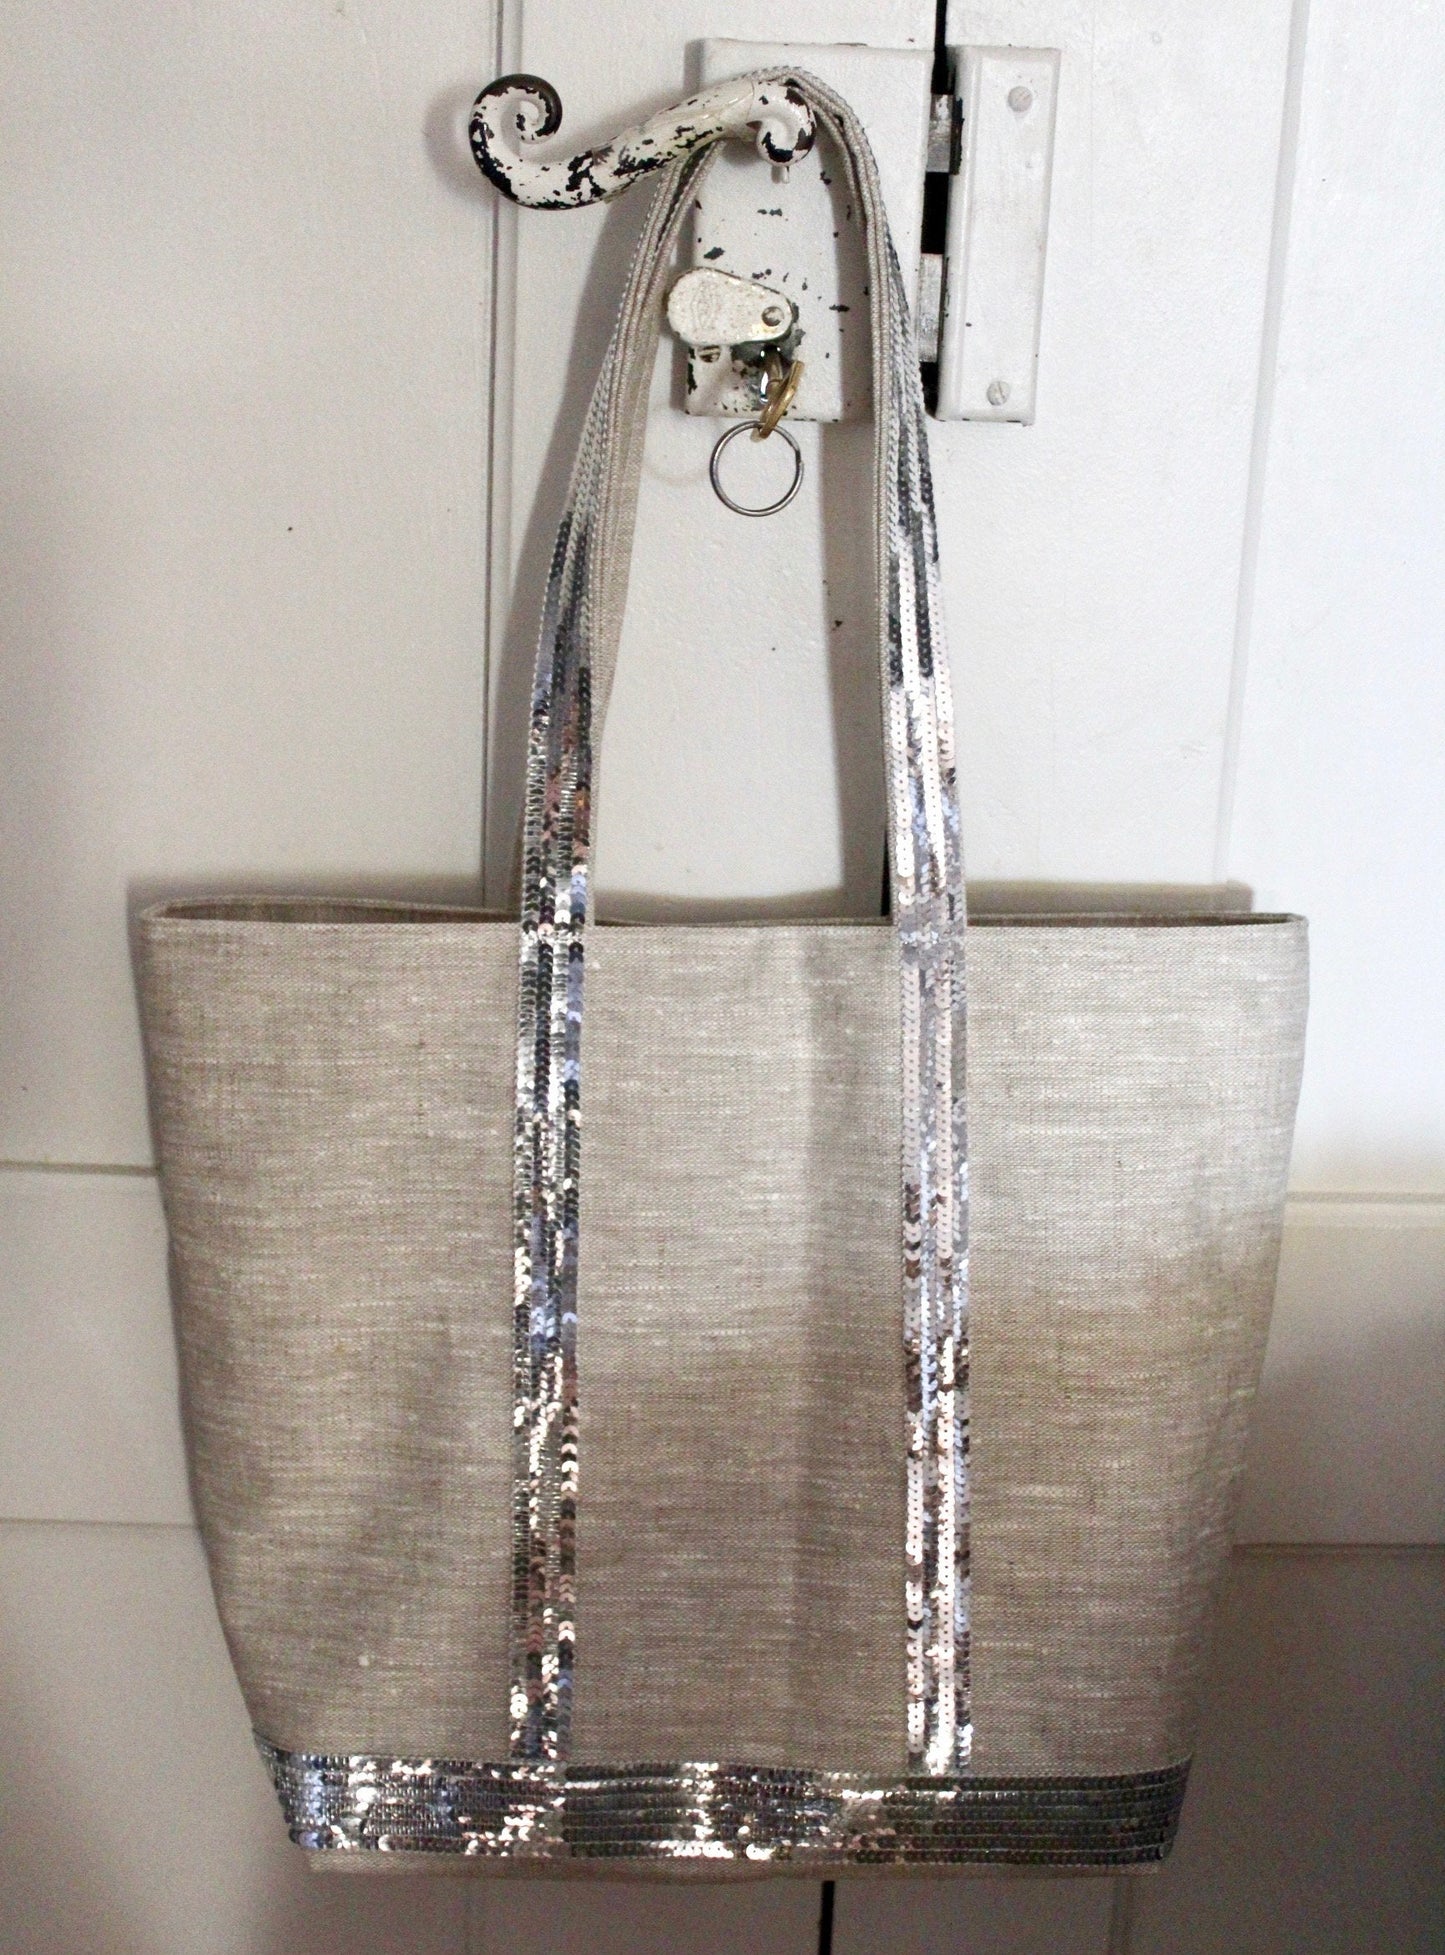 Tote bag in natural coated linen with silver sequins